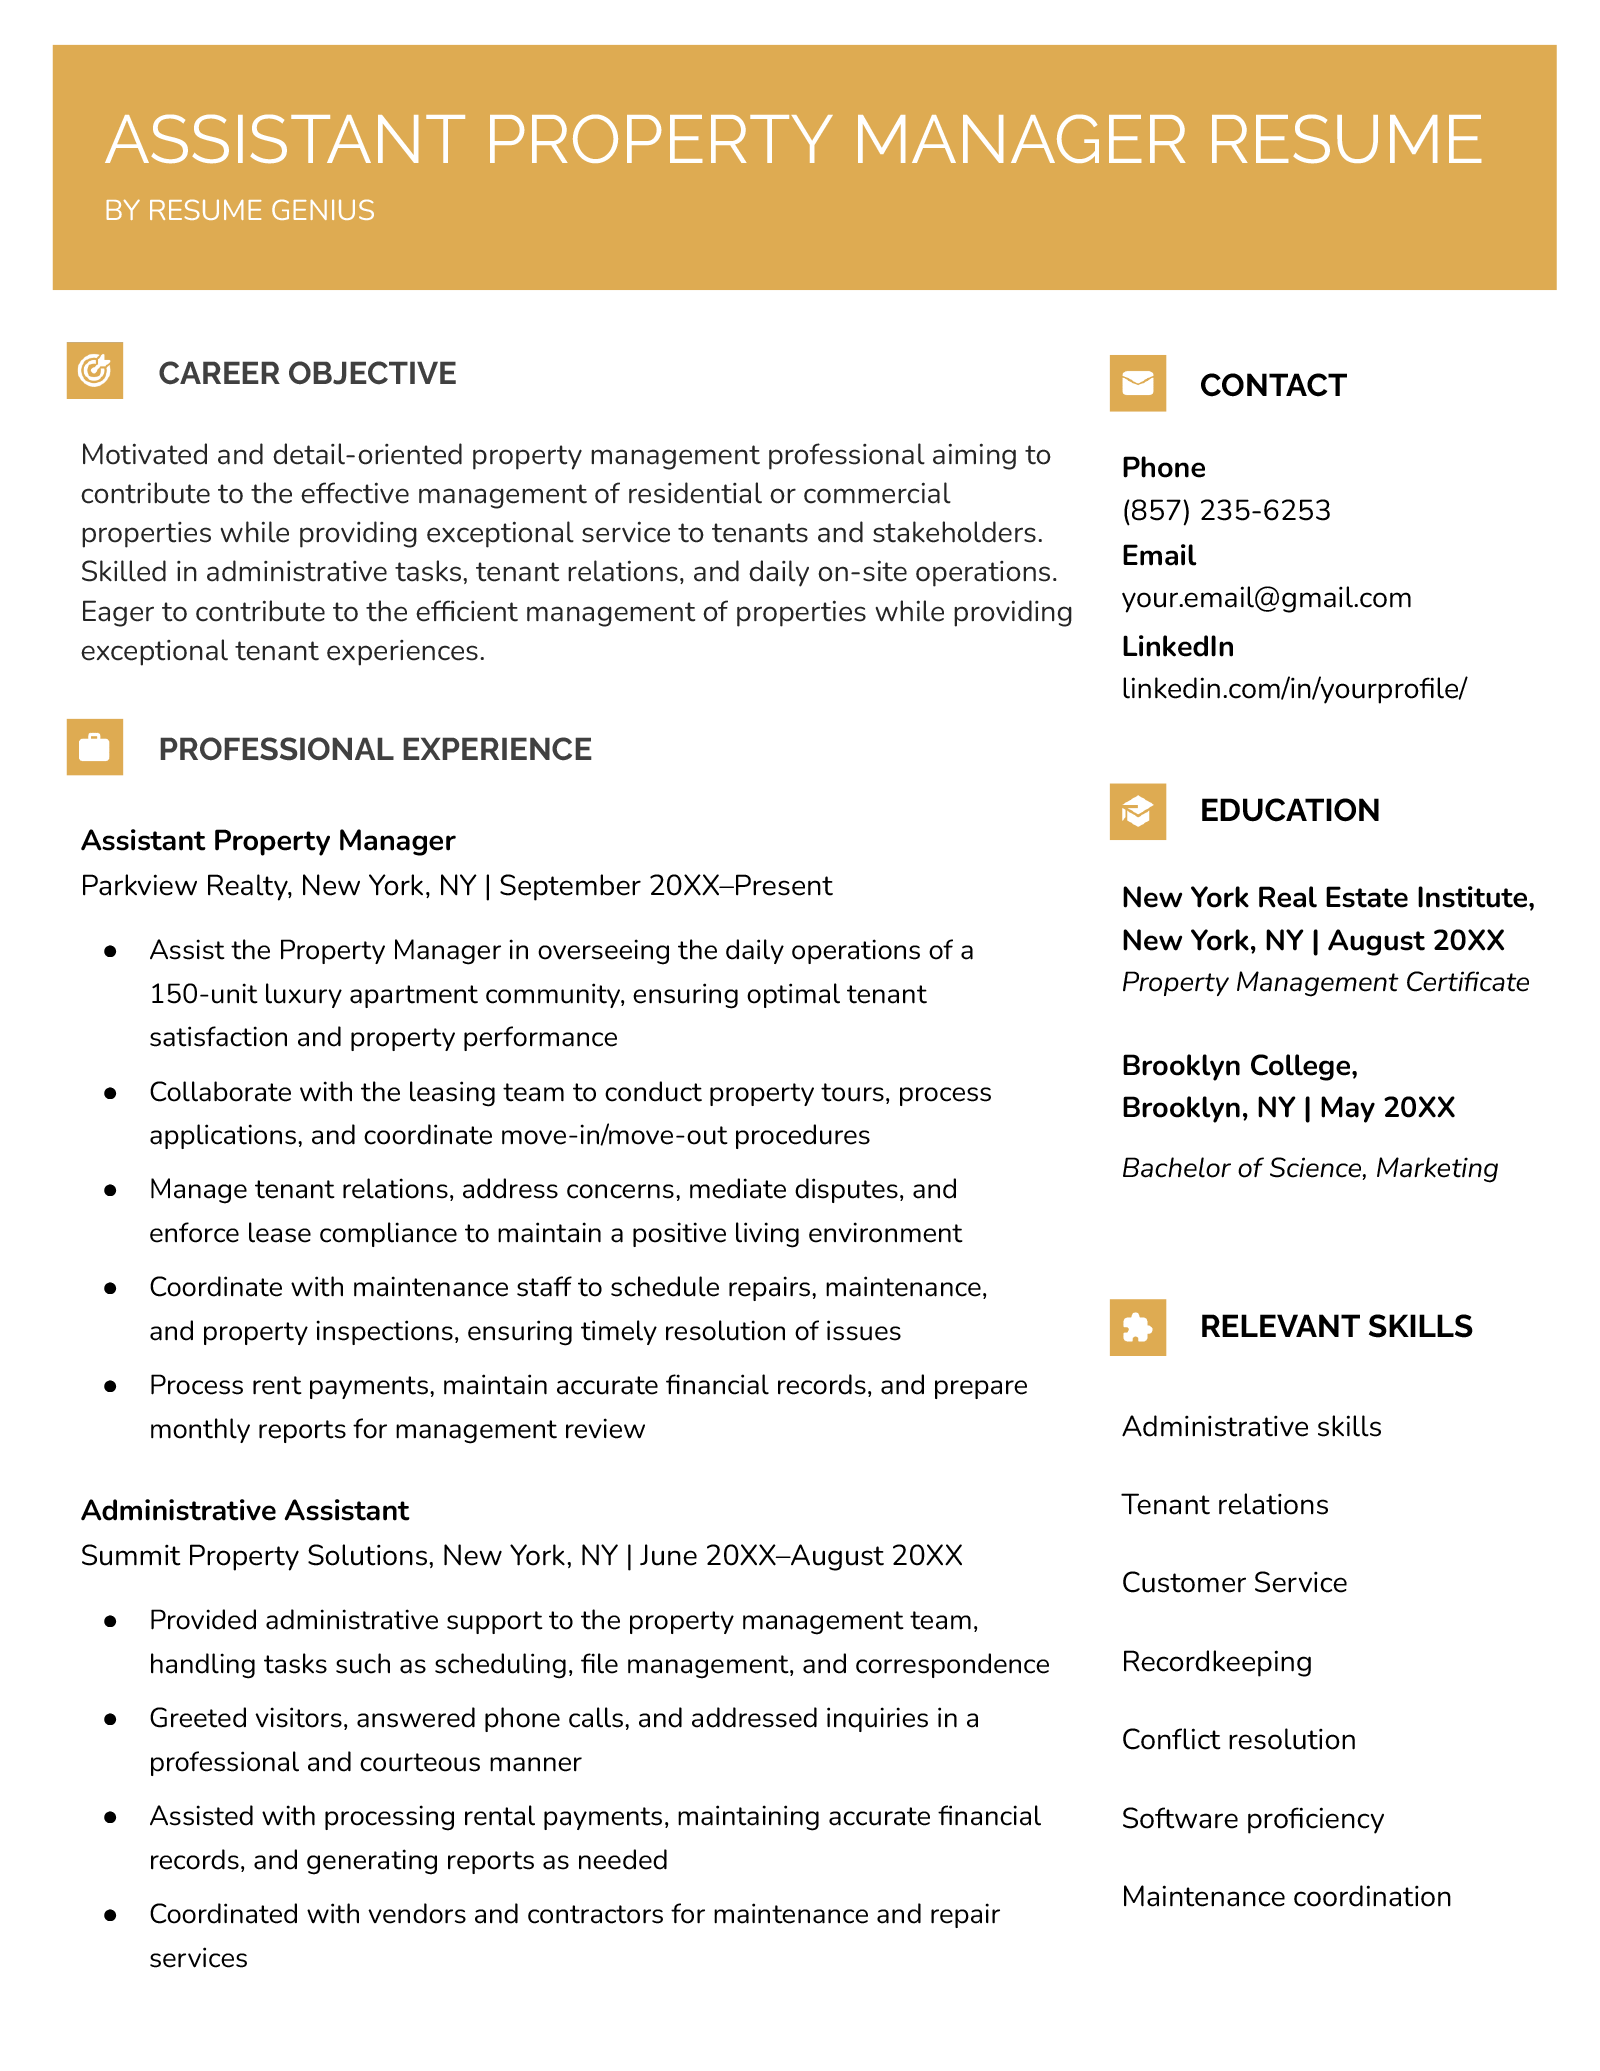 Resume Example for an Assistant Property Manager.